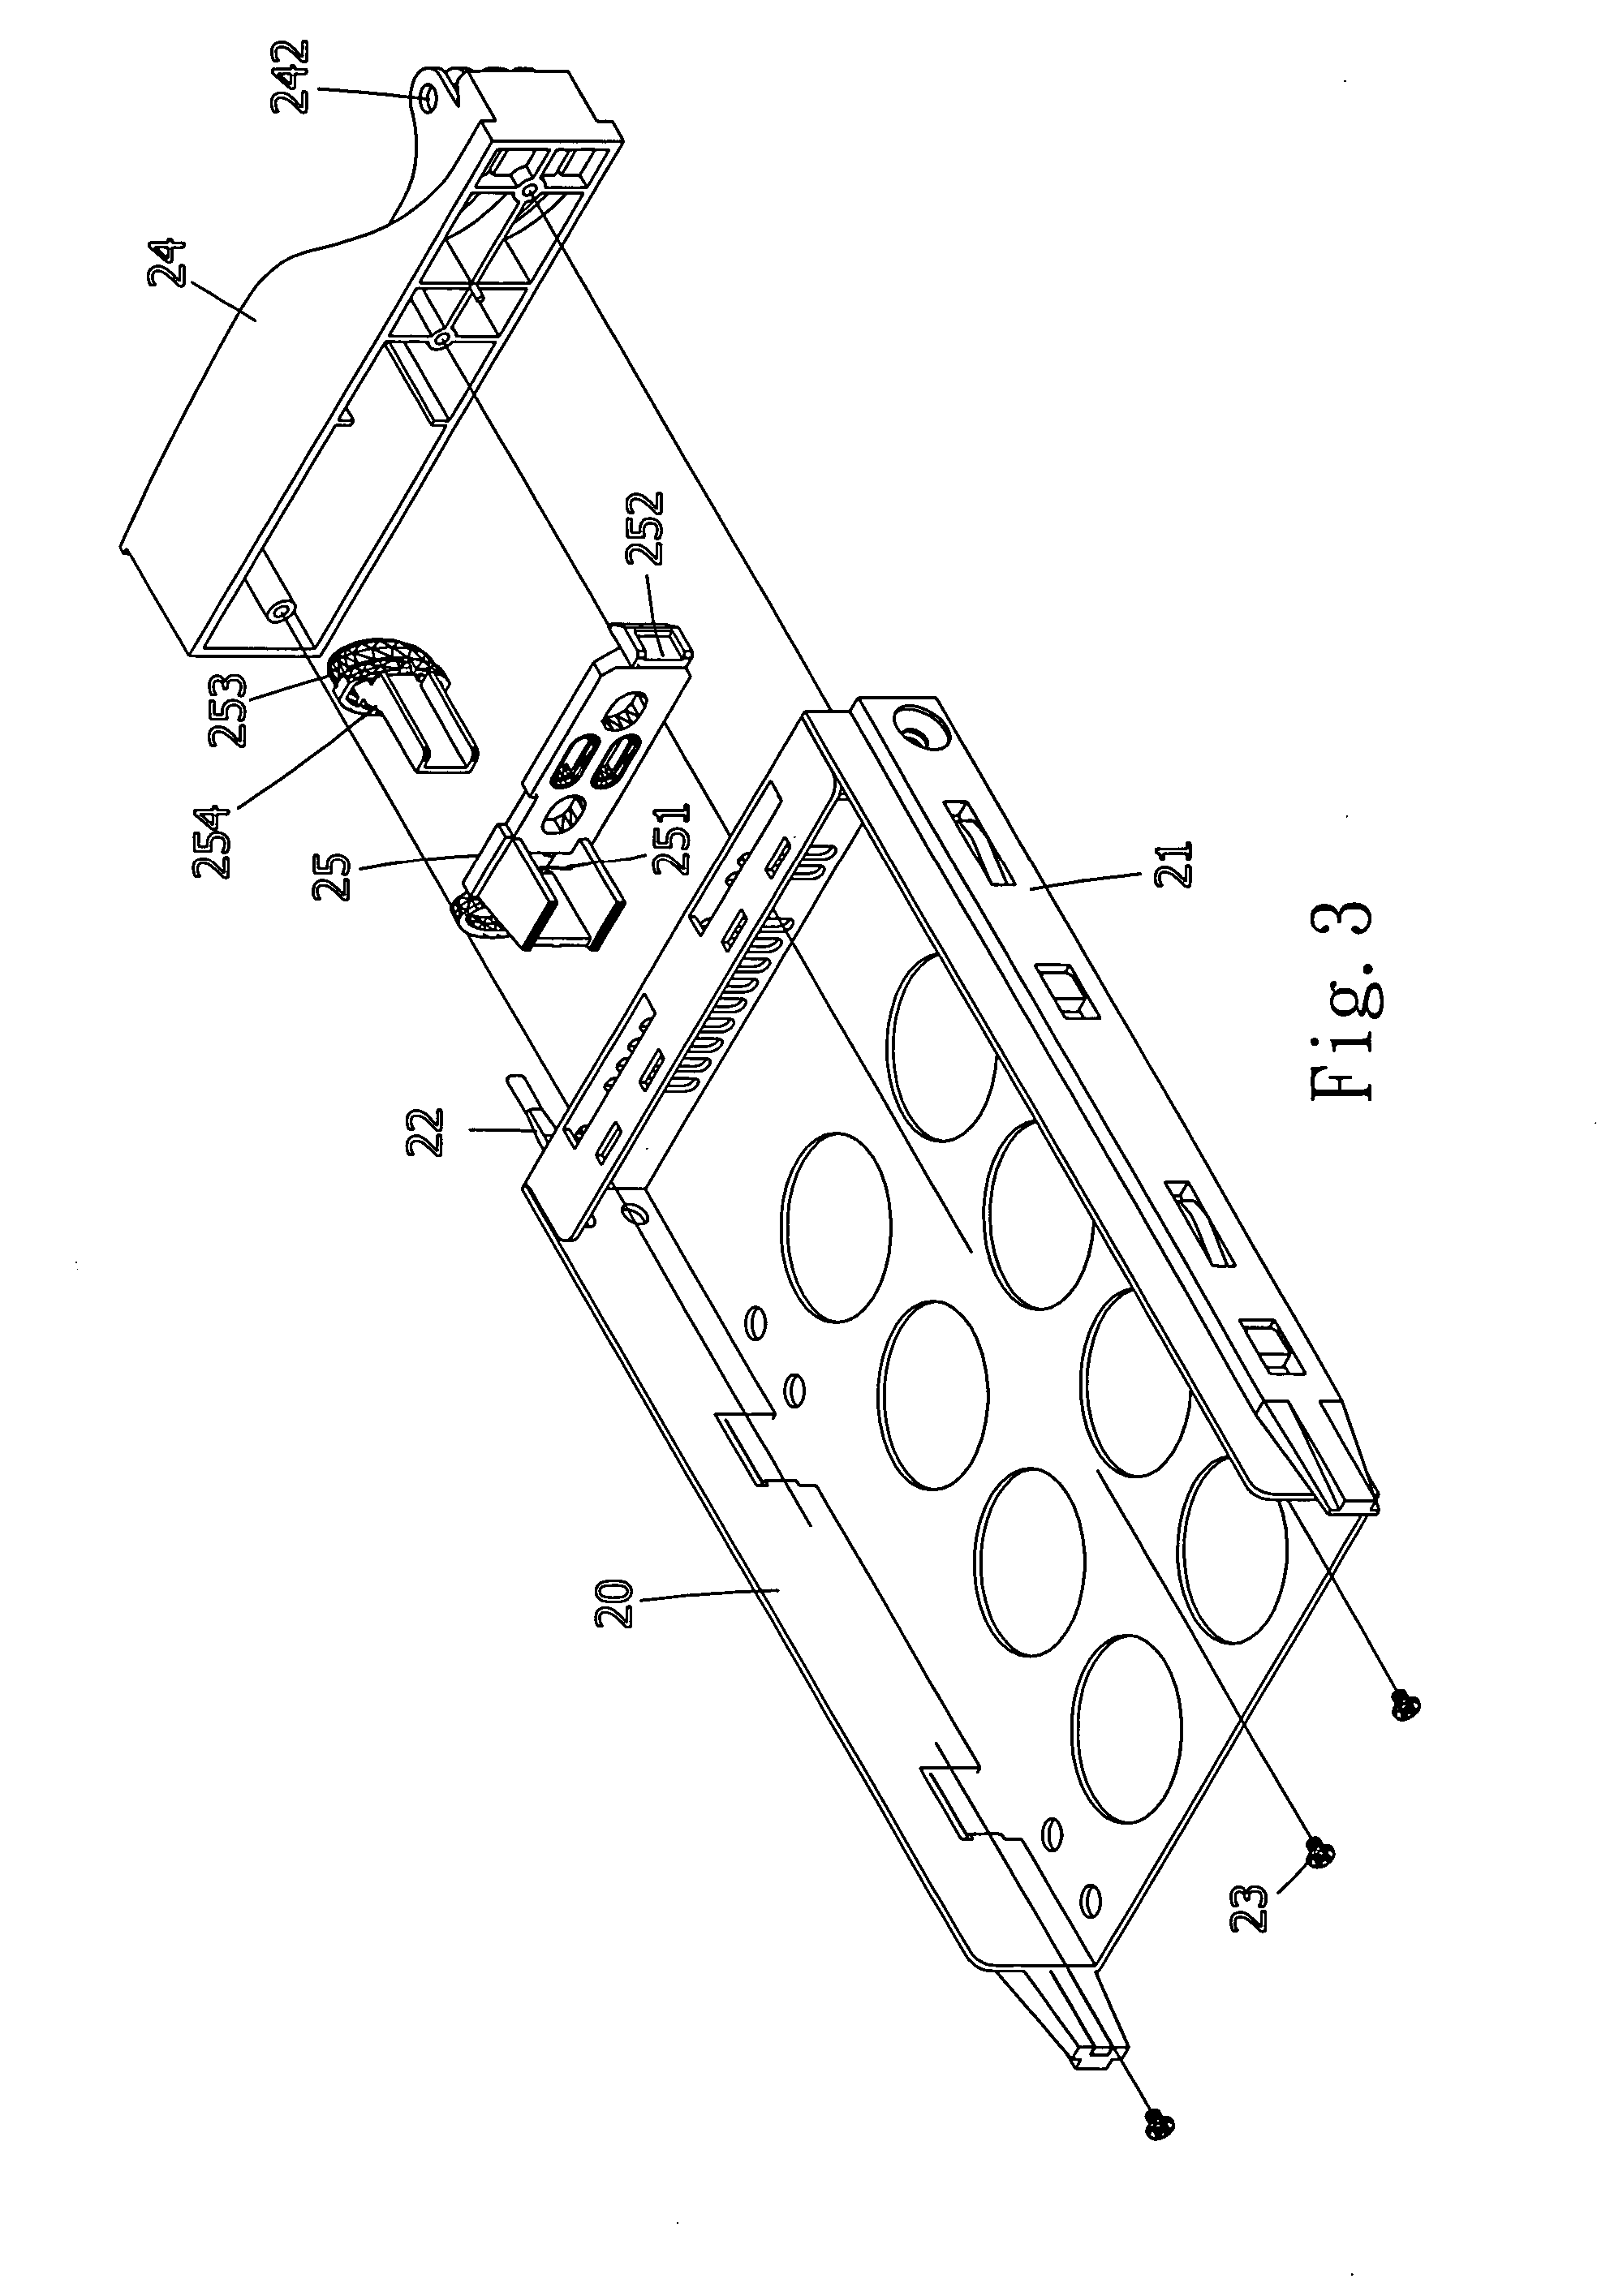 Transfer apparatus of detachable disk drive